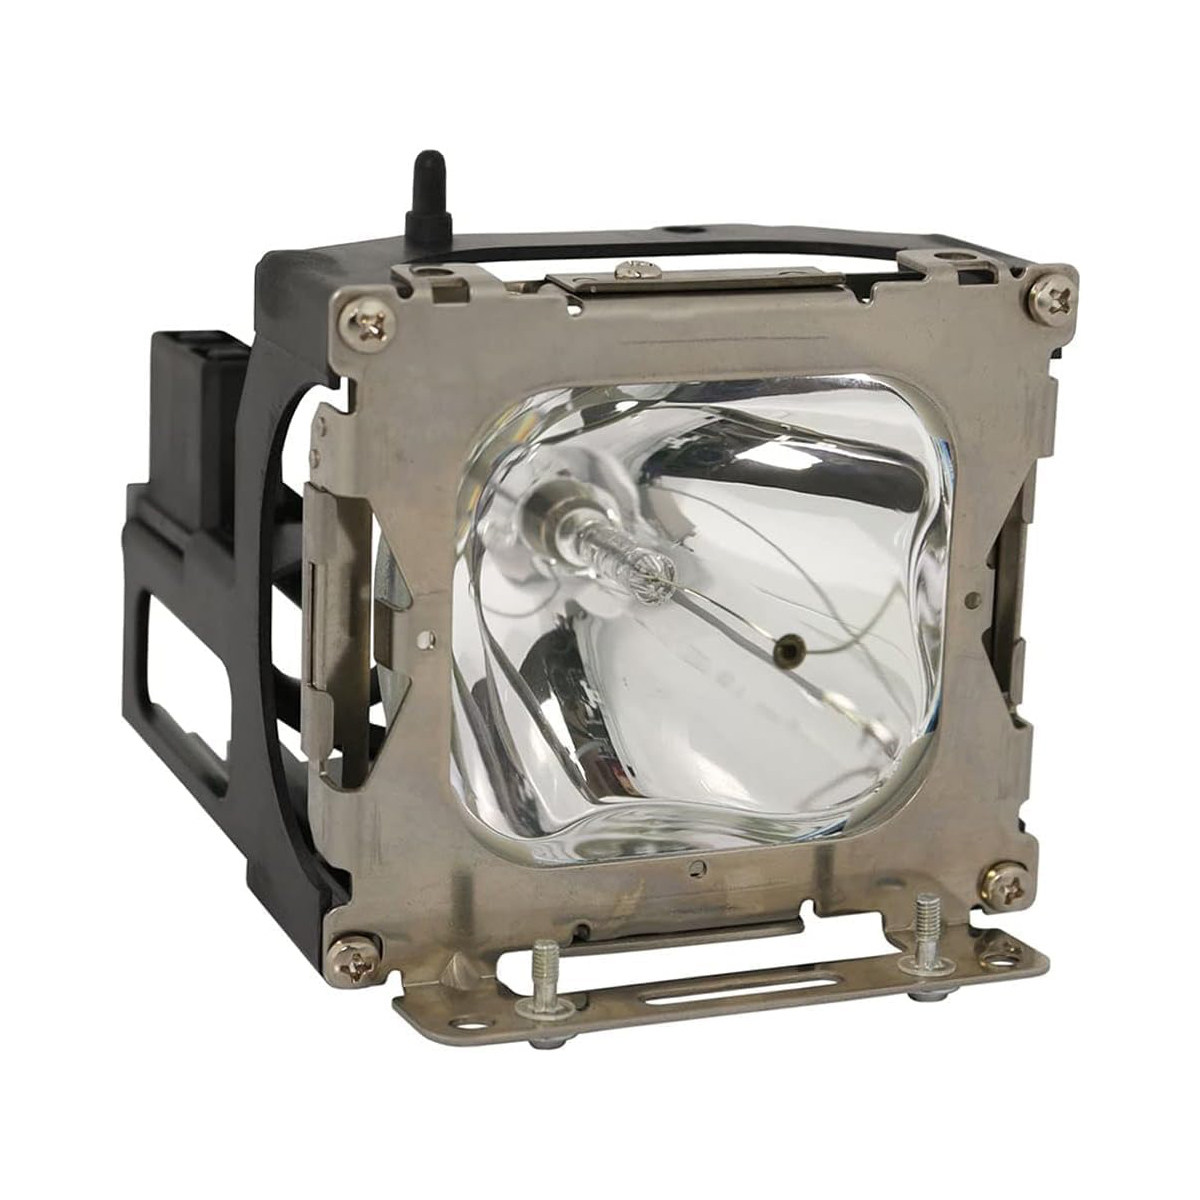 Replacement Projector lamp 78-6969-8920-7 For 3M MP7825 MP8635 MP8635